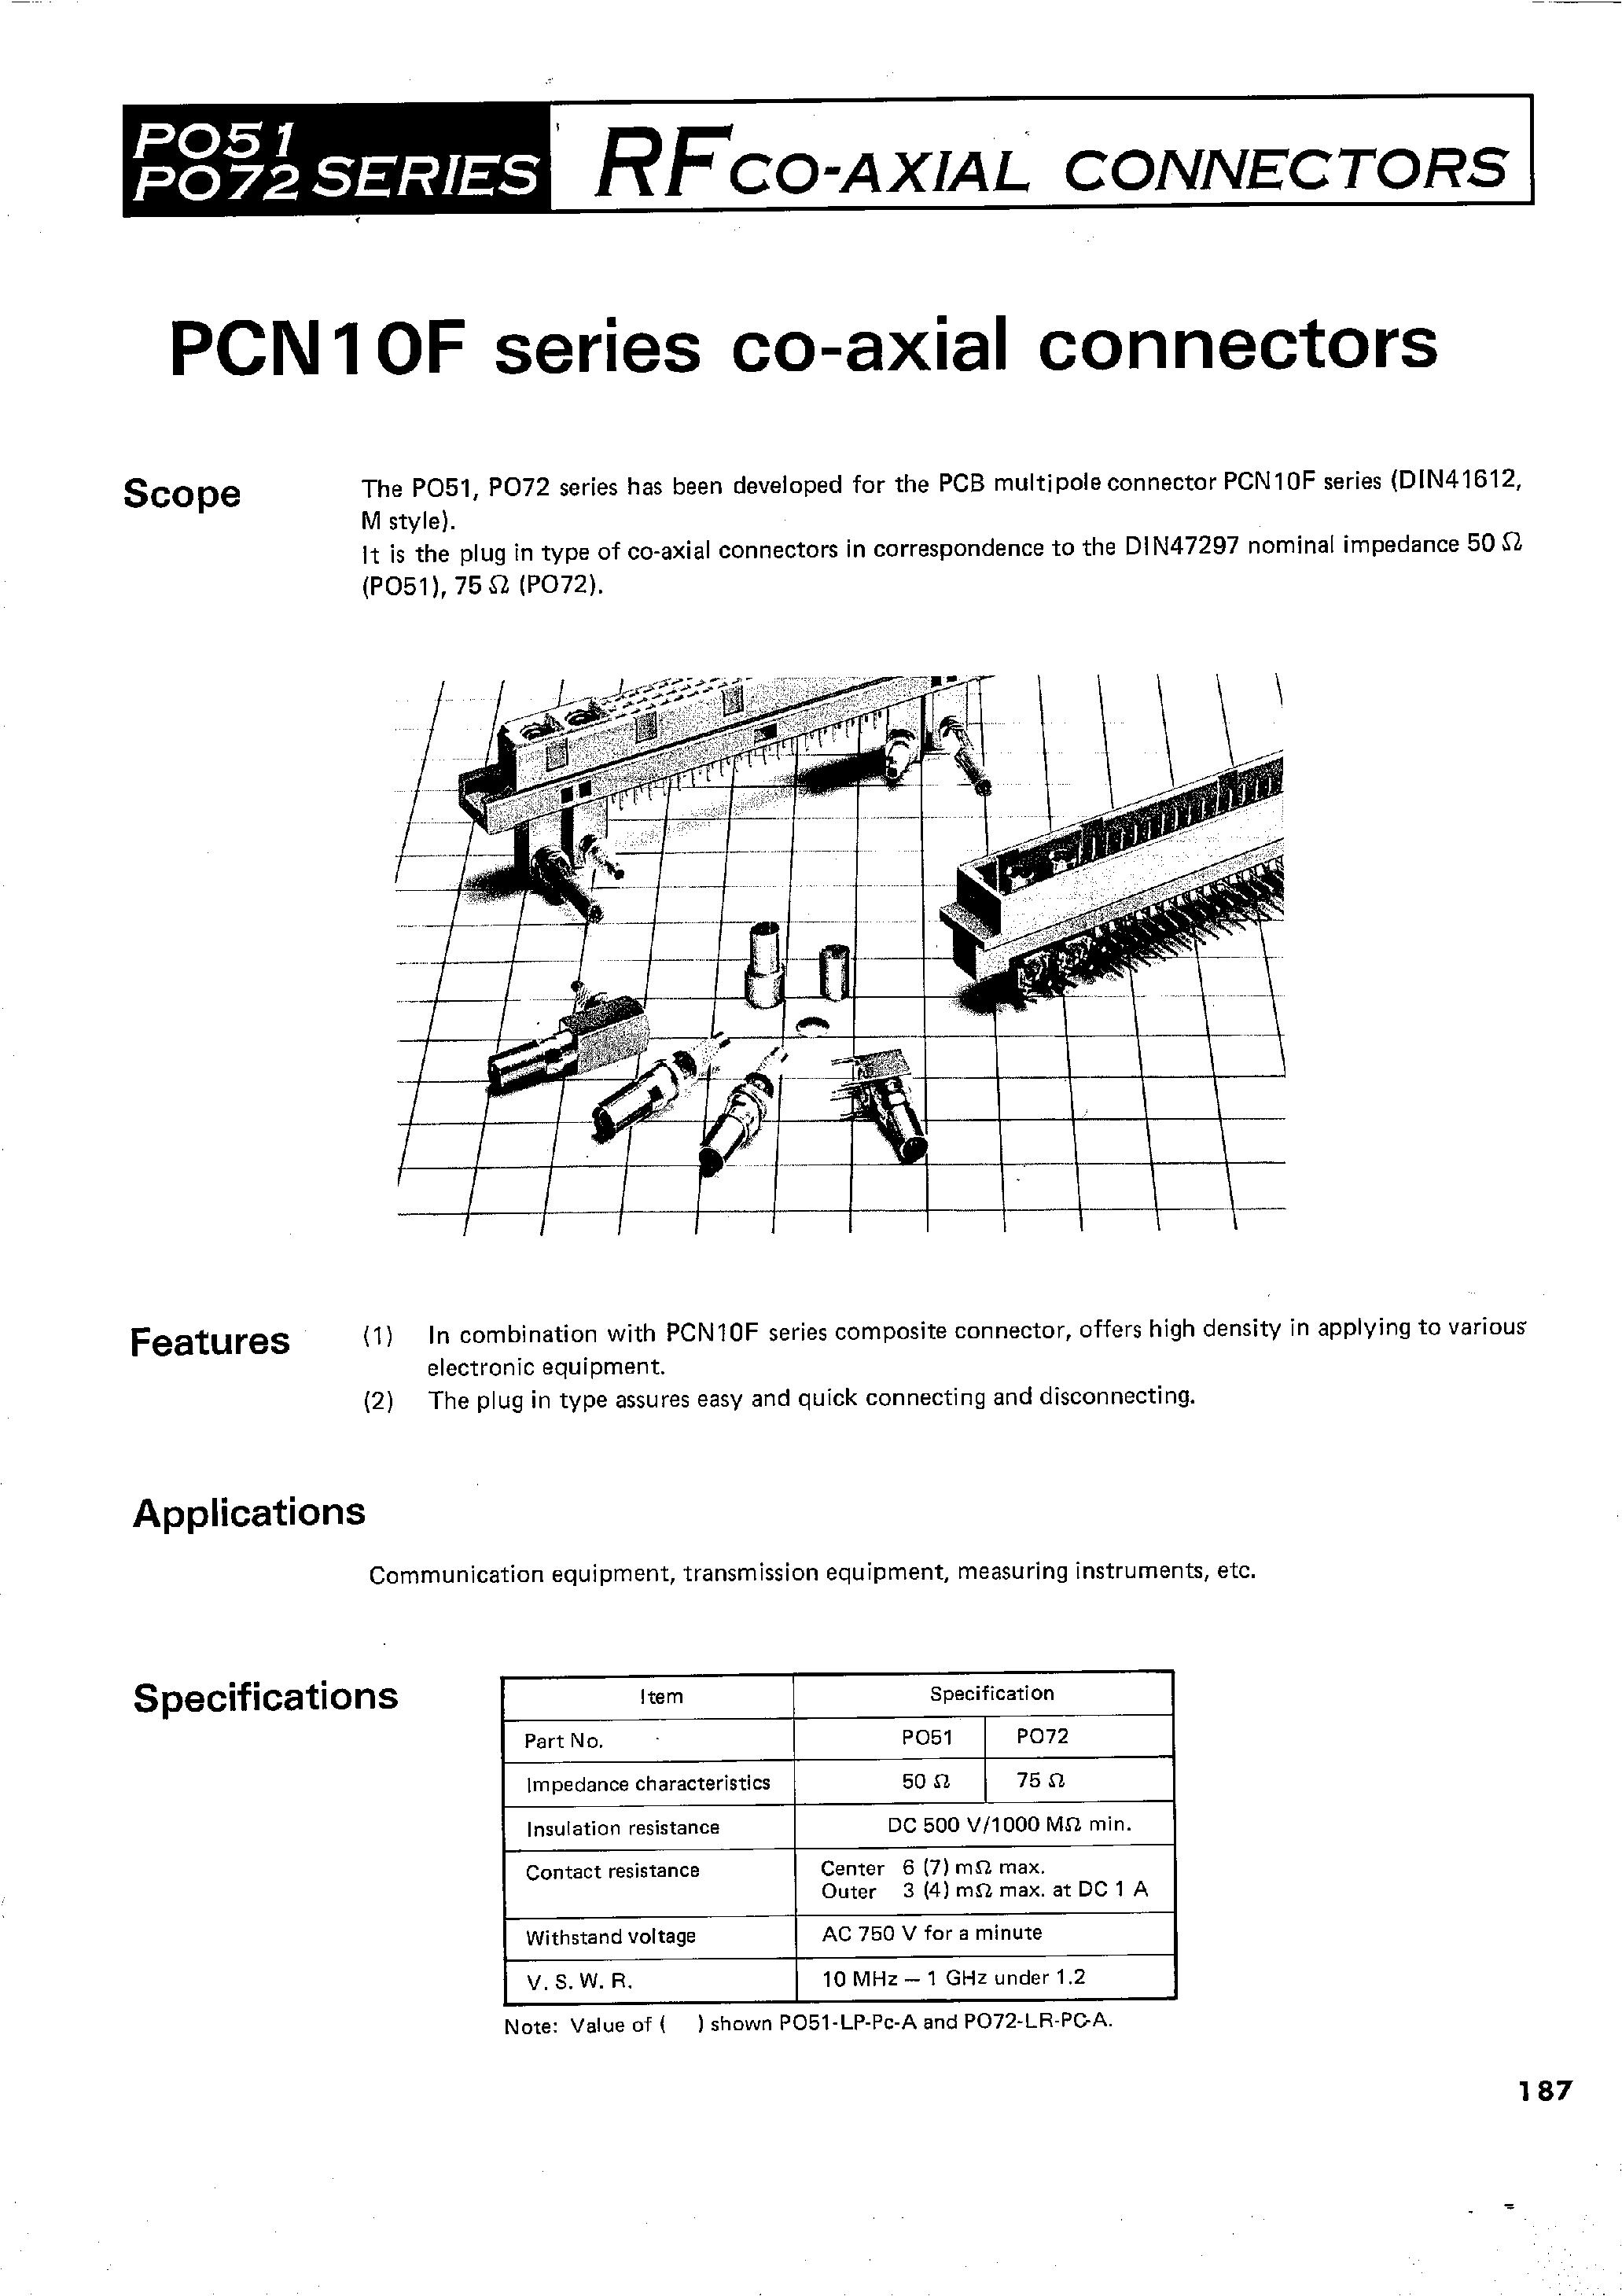 Datasheet PO51P-T-1 - RFCO-AXIAL CONNECTORS page 1